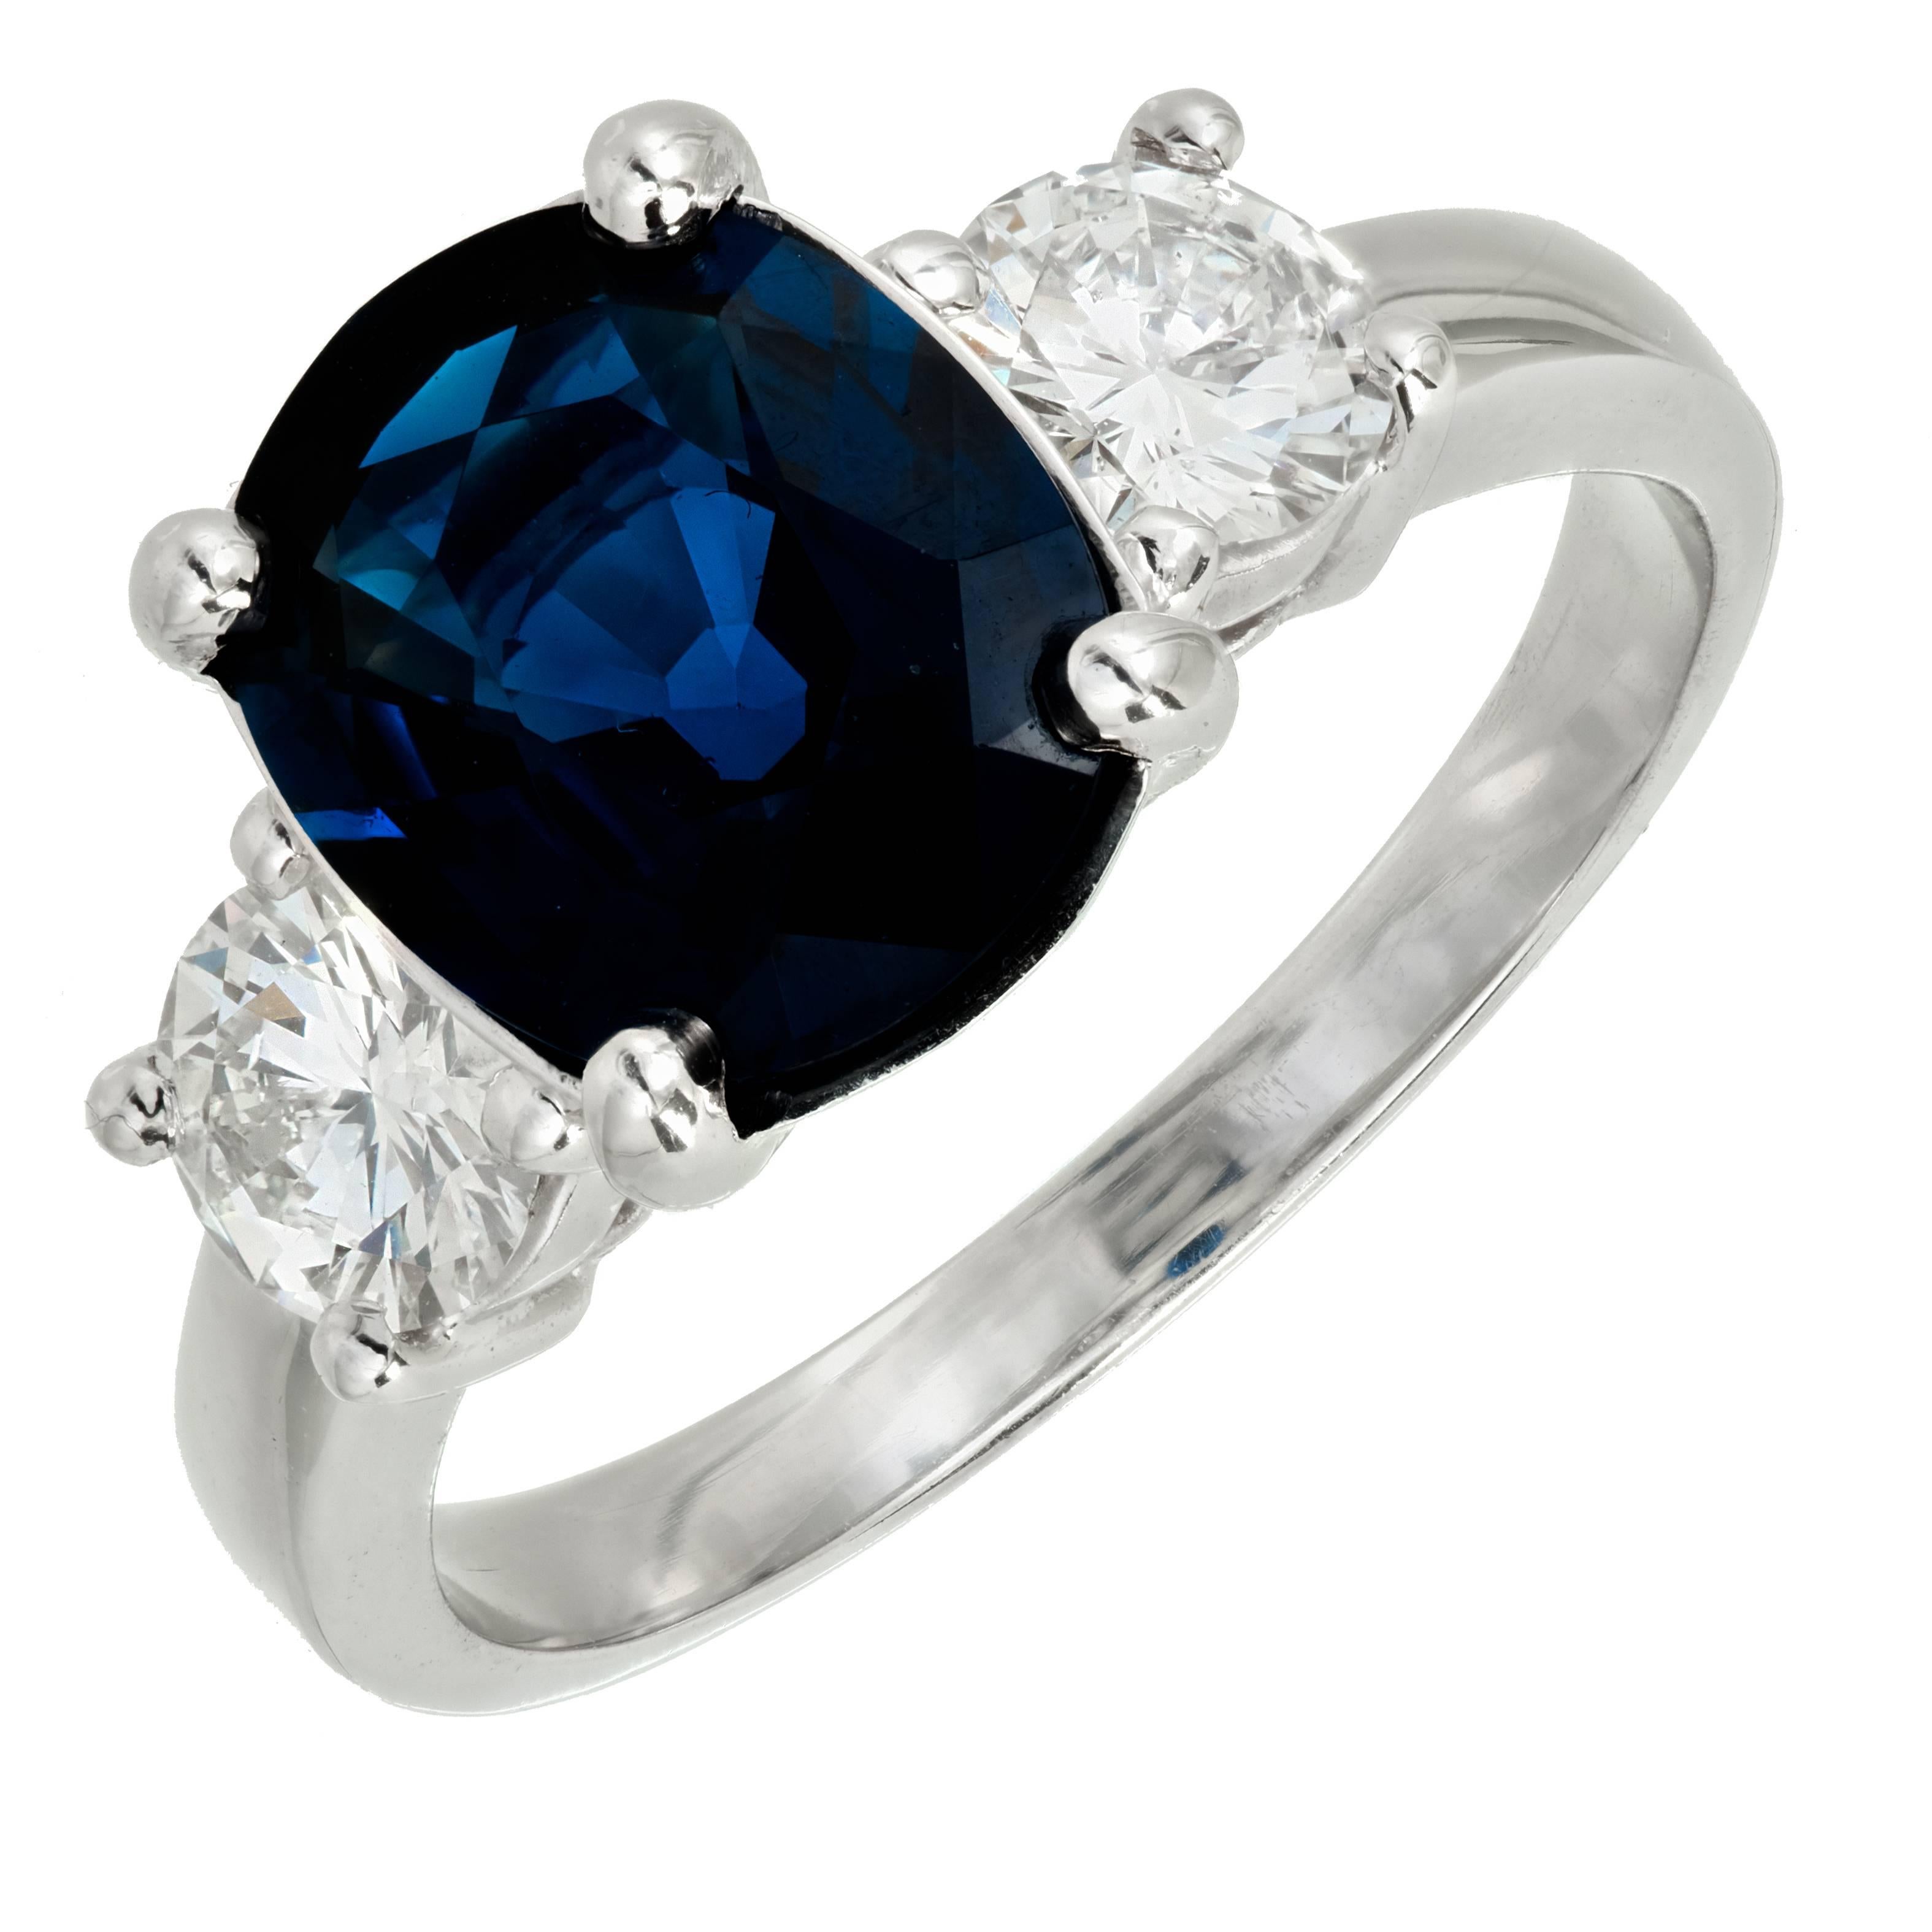 Peter Suchy GIA 3.24 Carat Blue Sapphire Diamond Three-Stone Engagement Ring  For Sale